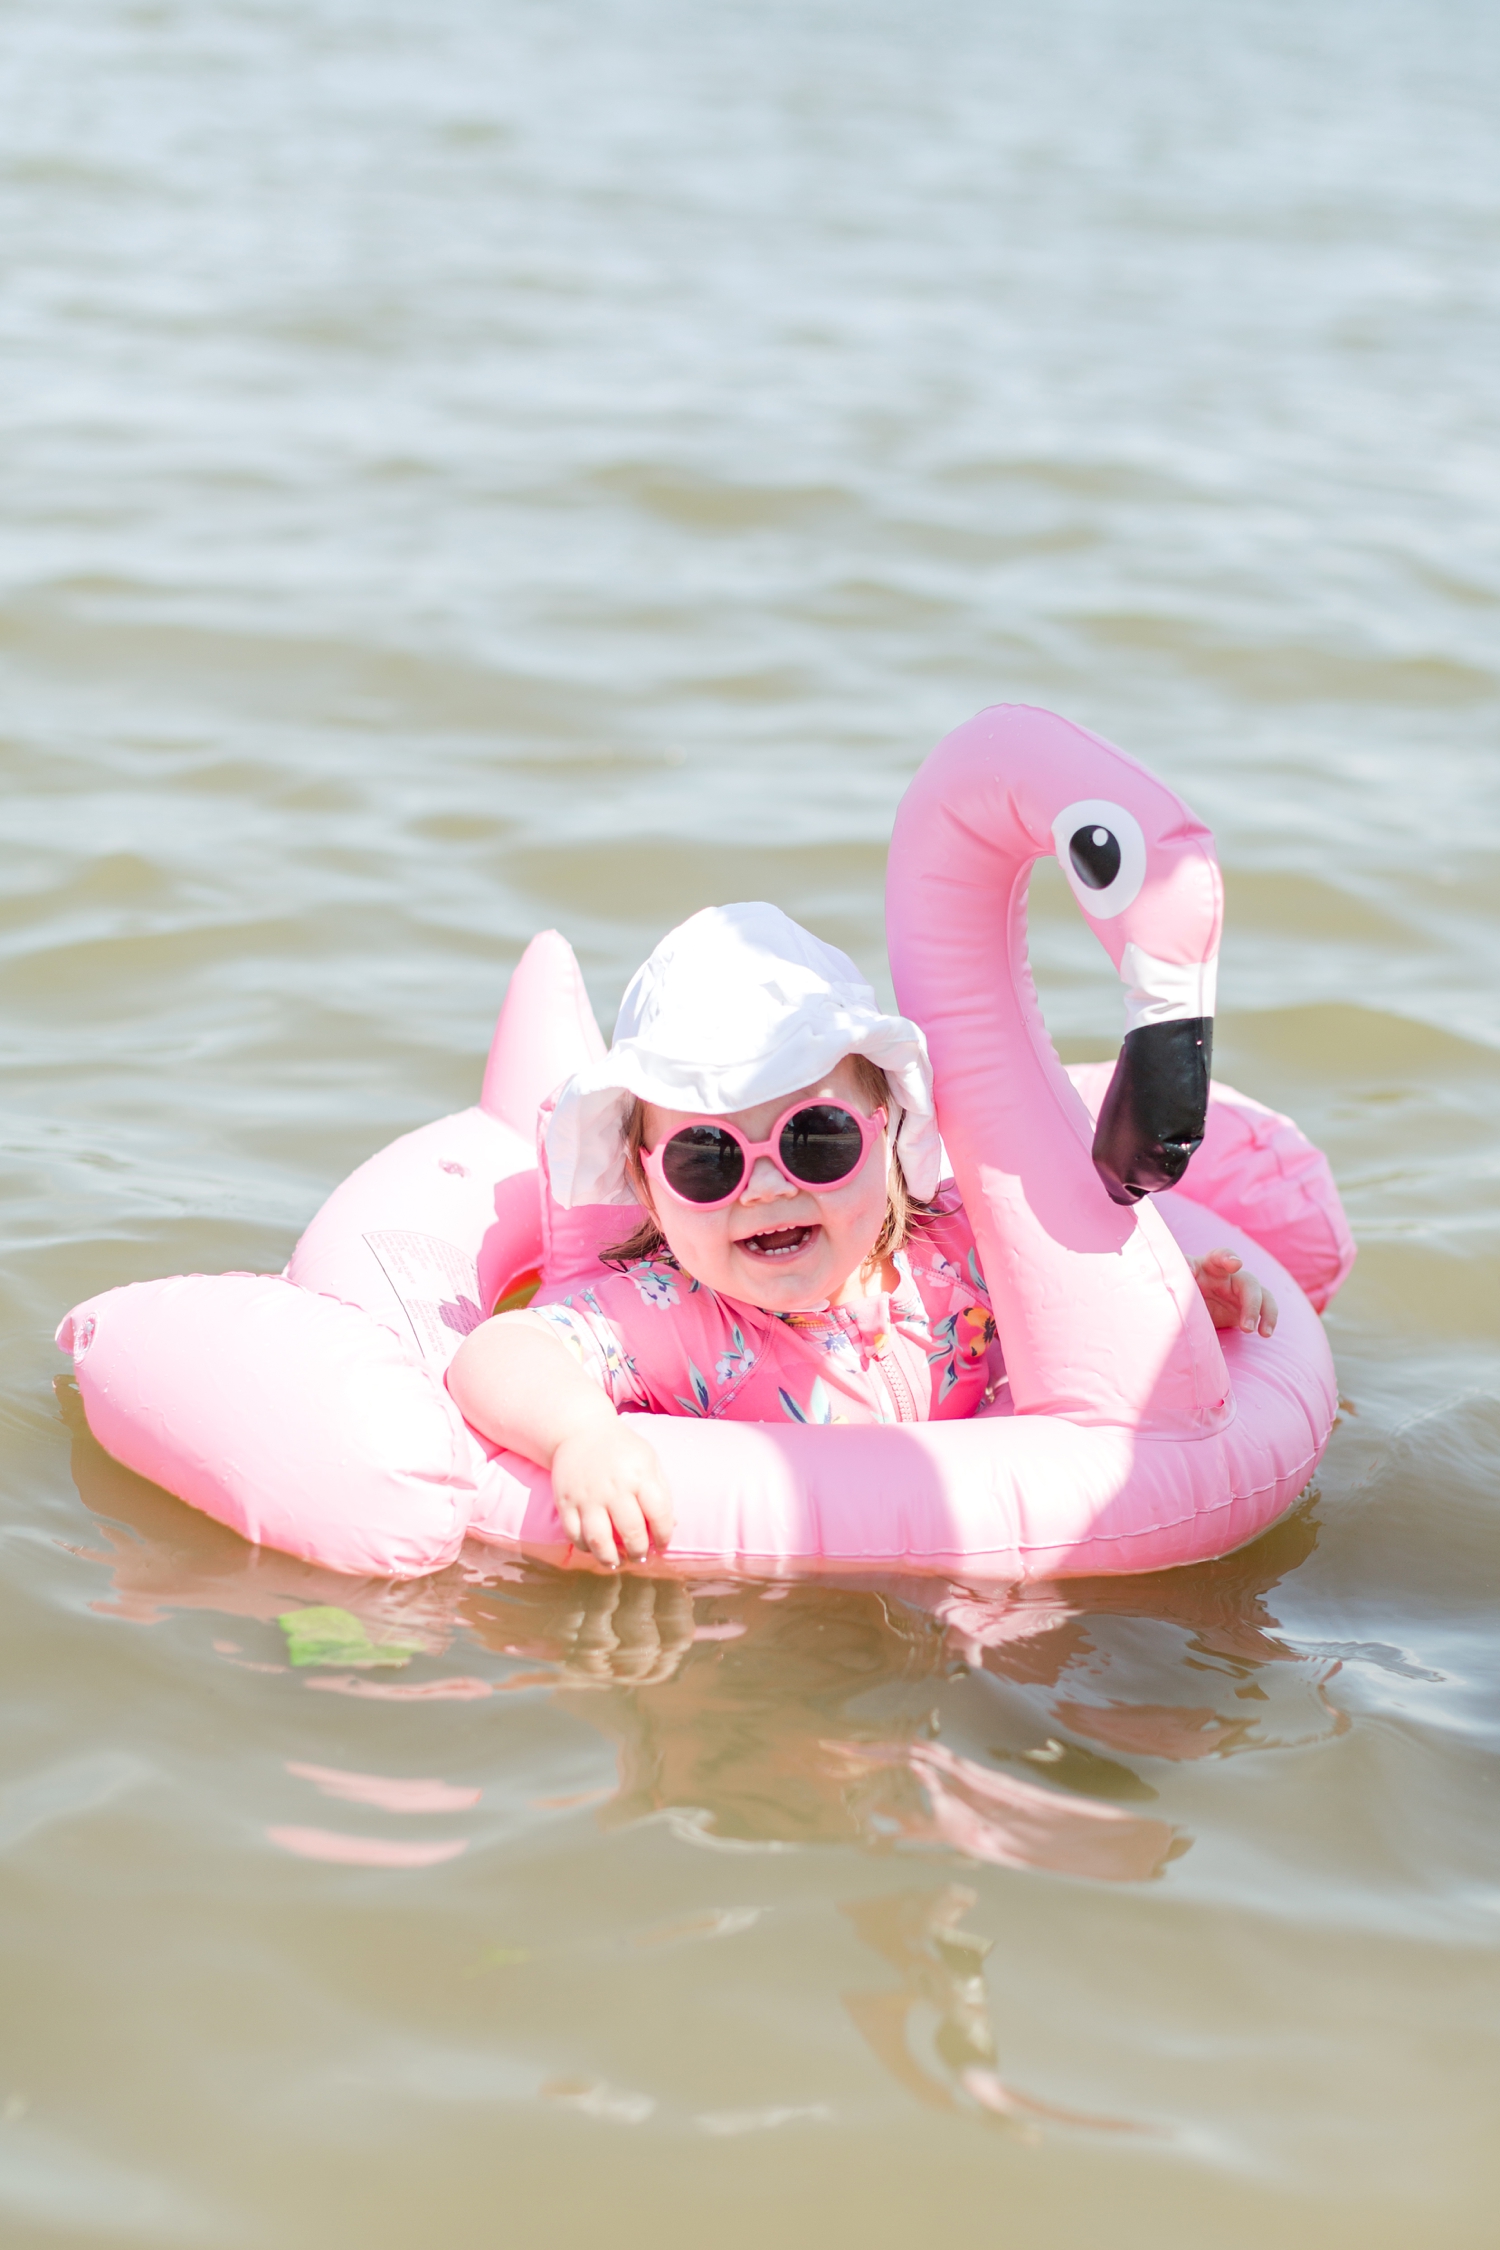  You may remember pics of Pay in the flamingo from   our Rehoboth trip last summer  ! She loves this floatie!  